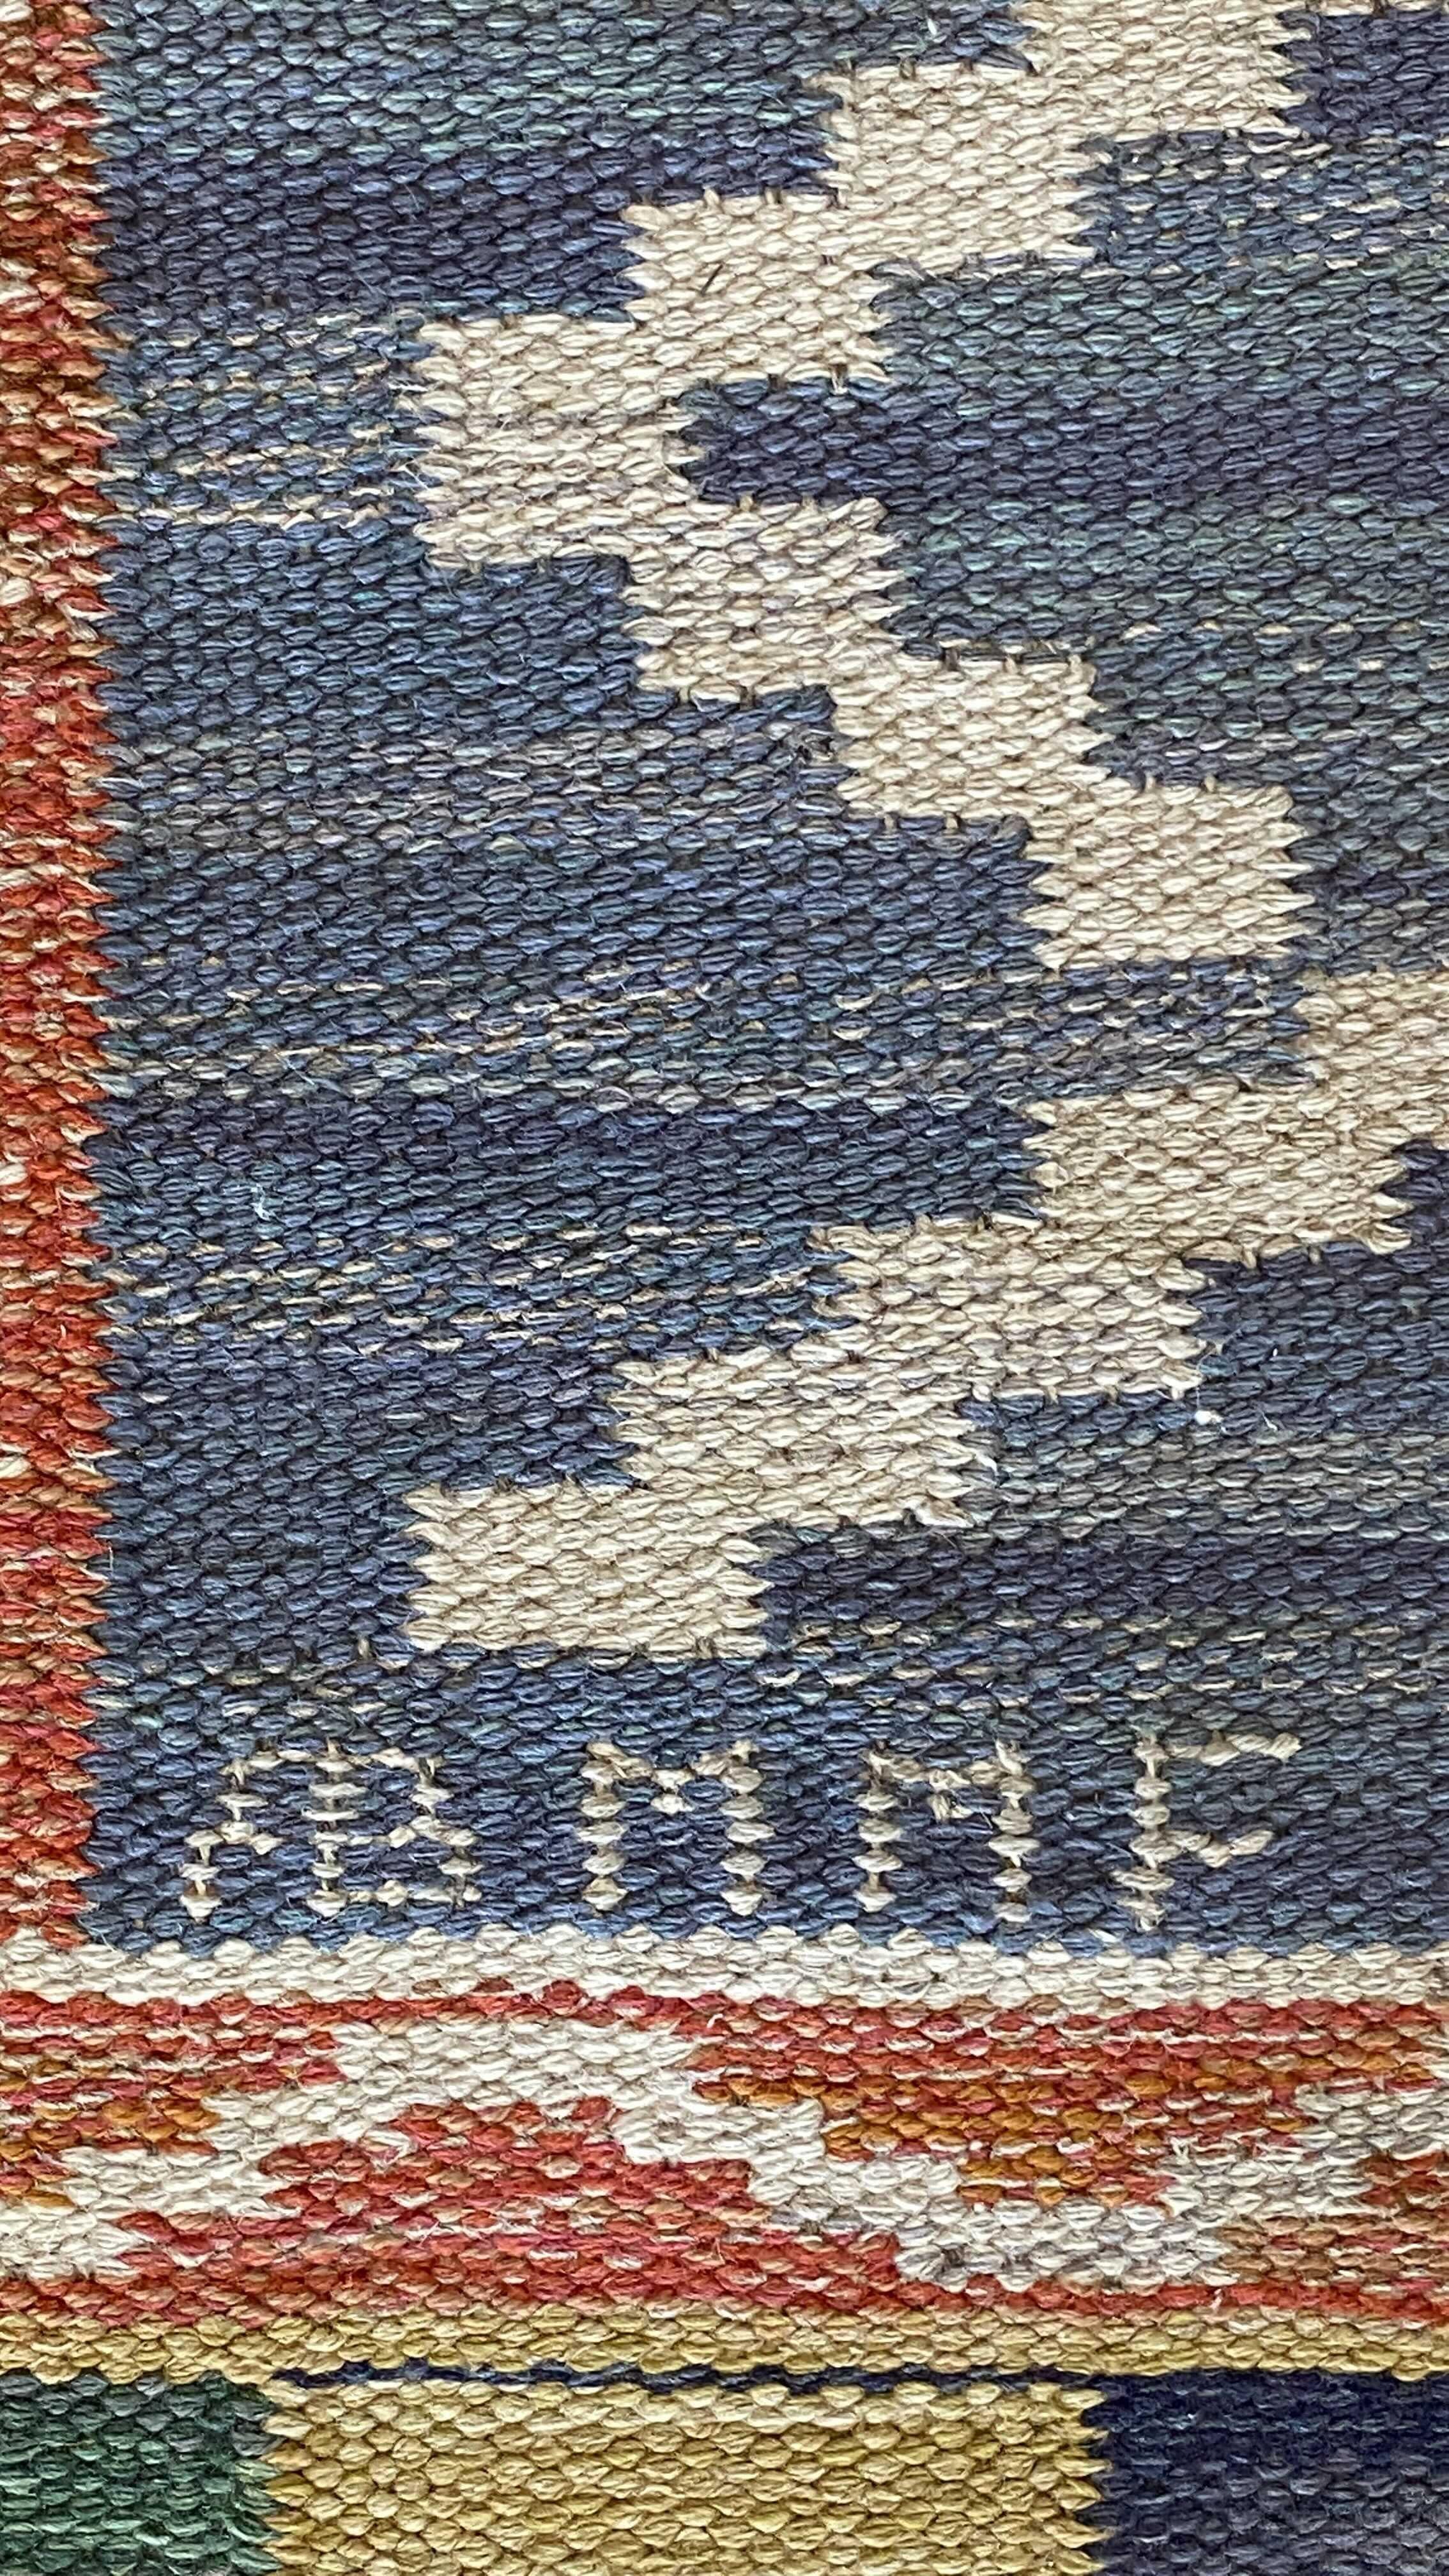 A rare handwoven modernist flat-weave carpet or rug by Märta Måås-Fjetterström. Handwoven in wool, using a Kilim technique. Signed. Designed circa 1950s.

Other artists include Berit Woelfer, Barbro Nilsson, Ann-Marie Hoke, Ingegerd Silow and